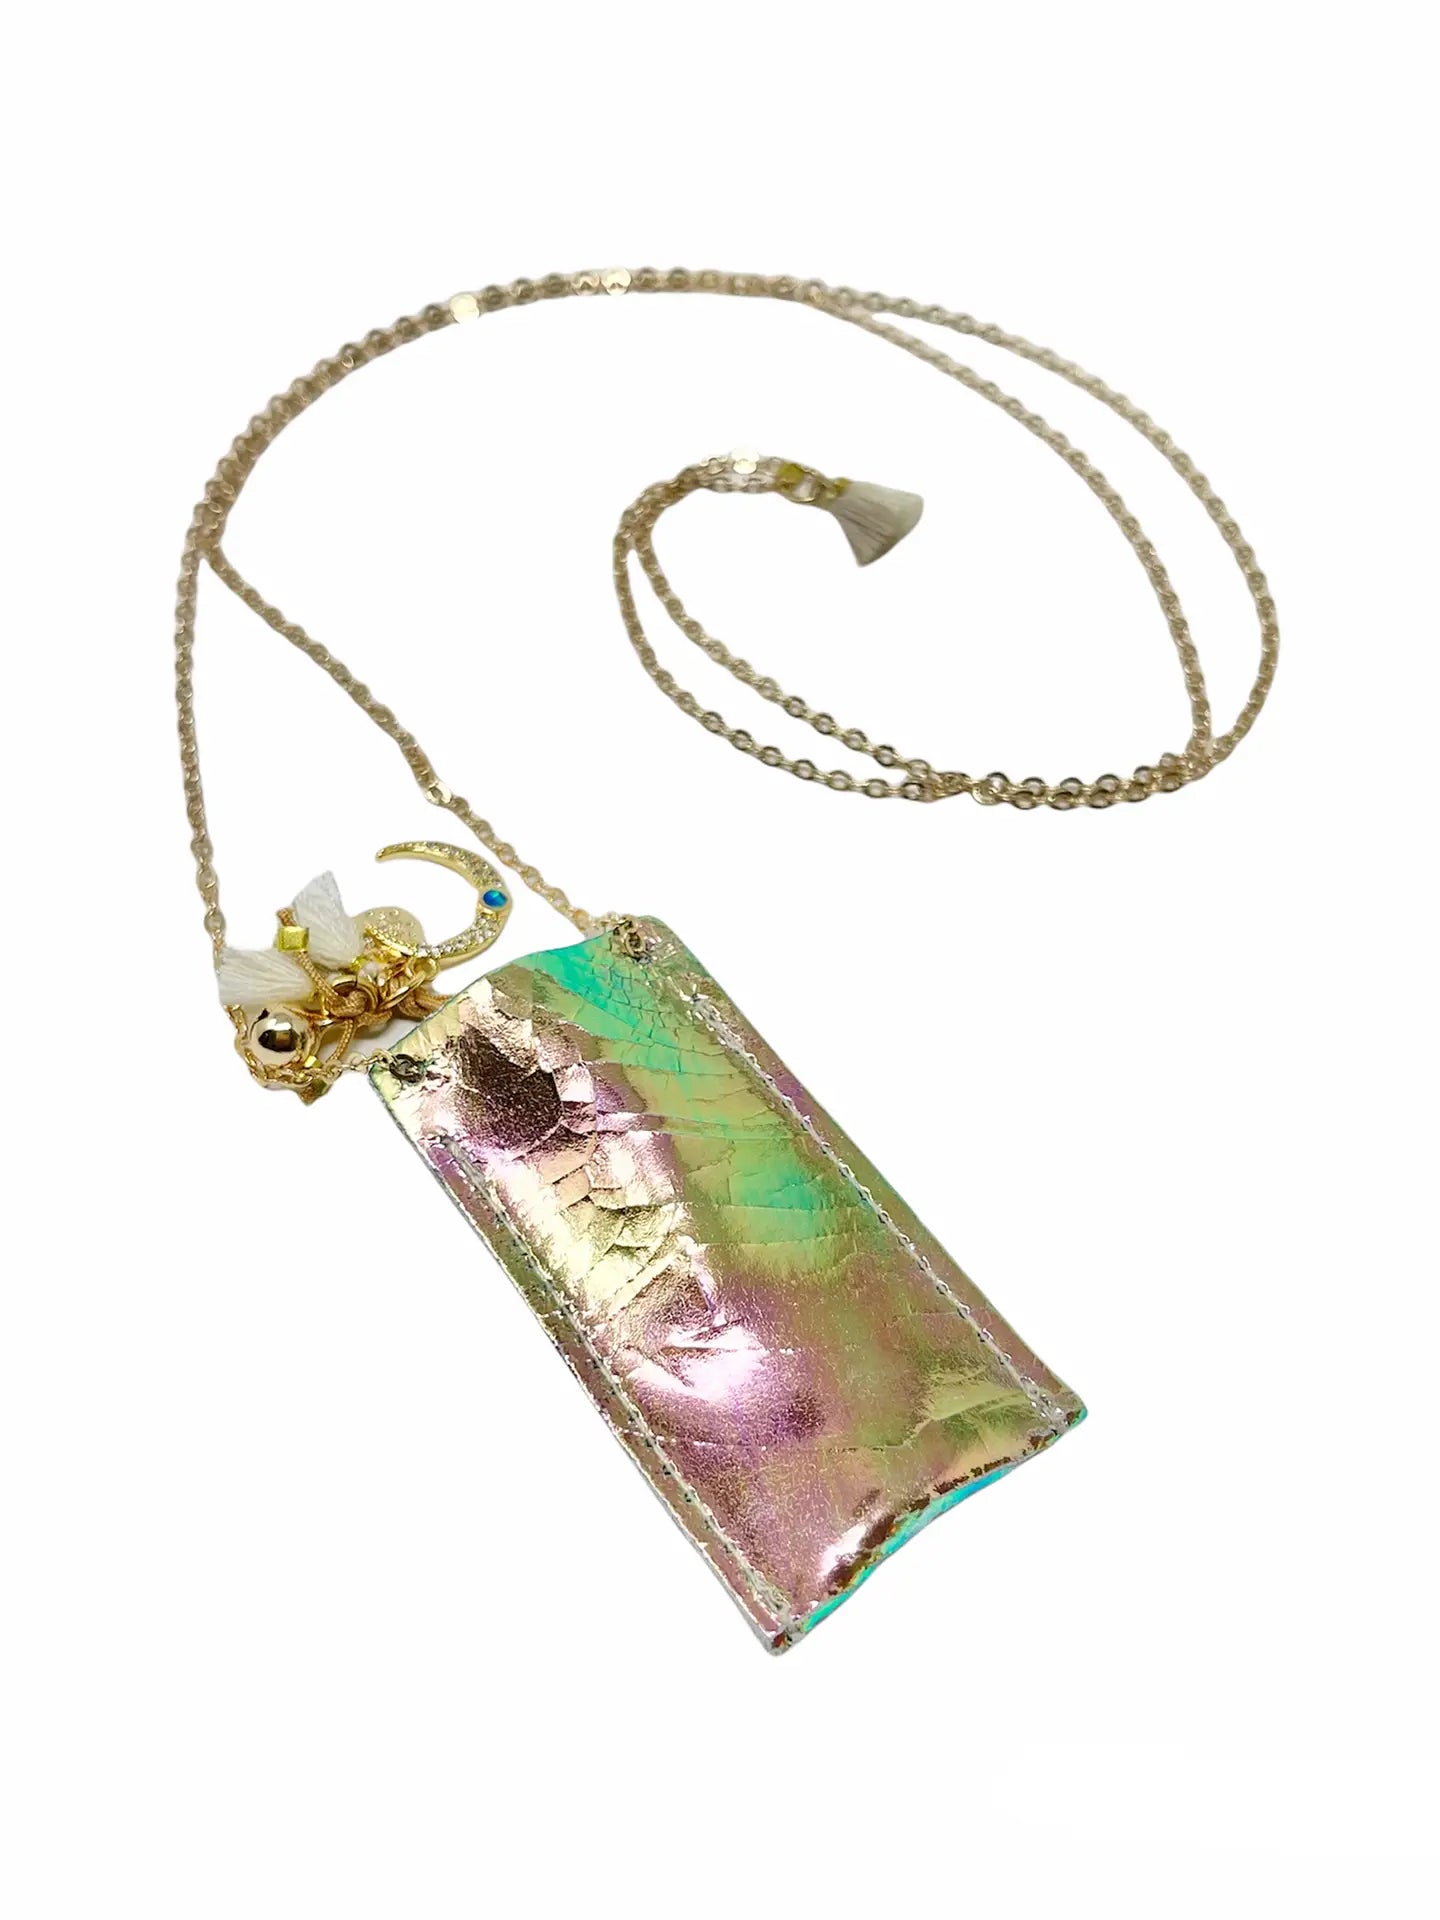 Crystal Necklace with Leather Foil Pouch